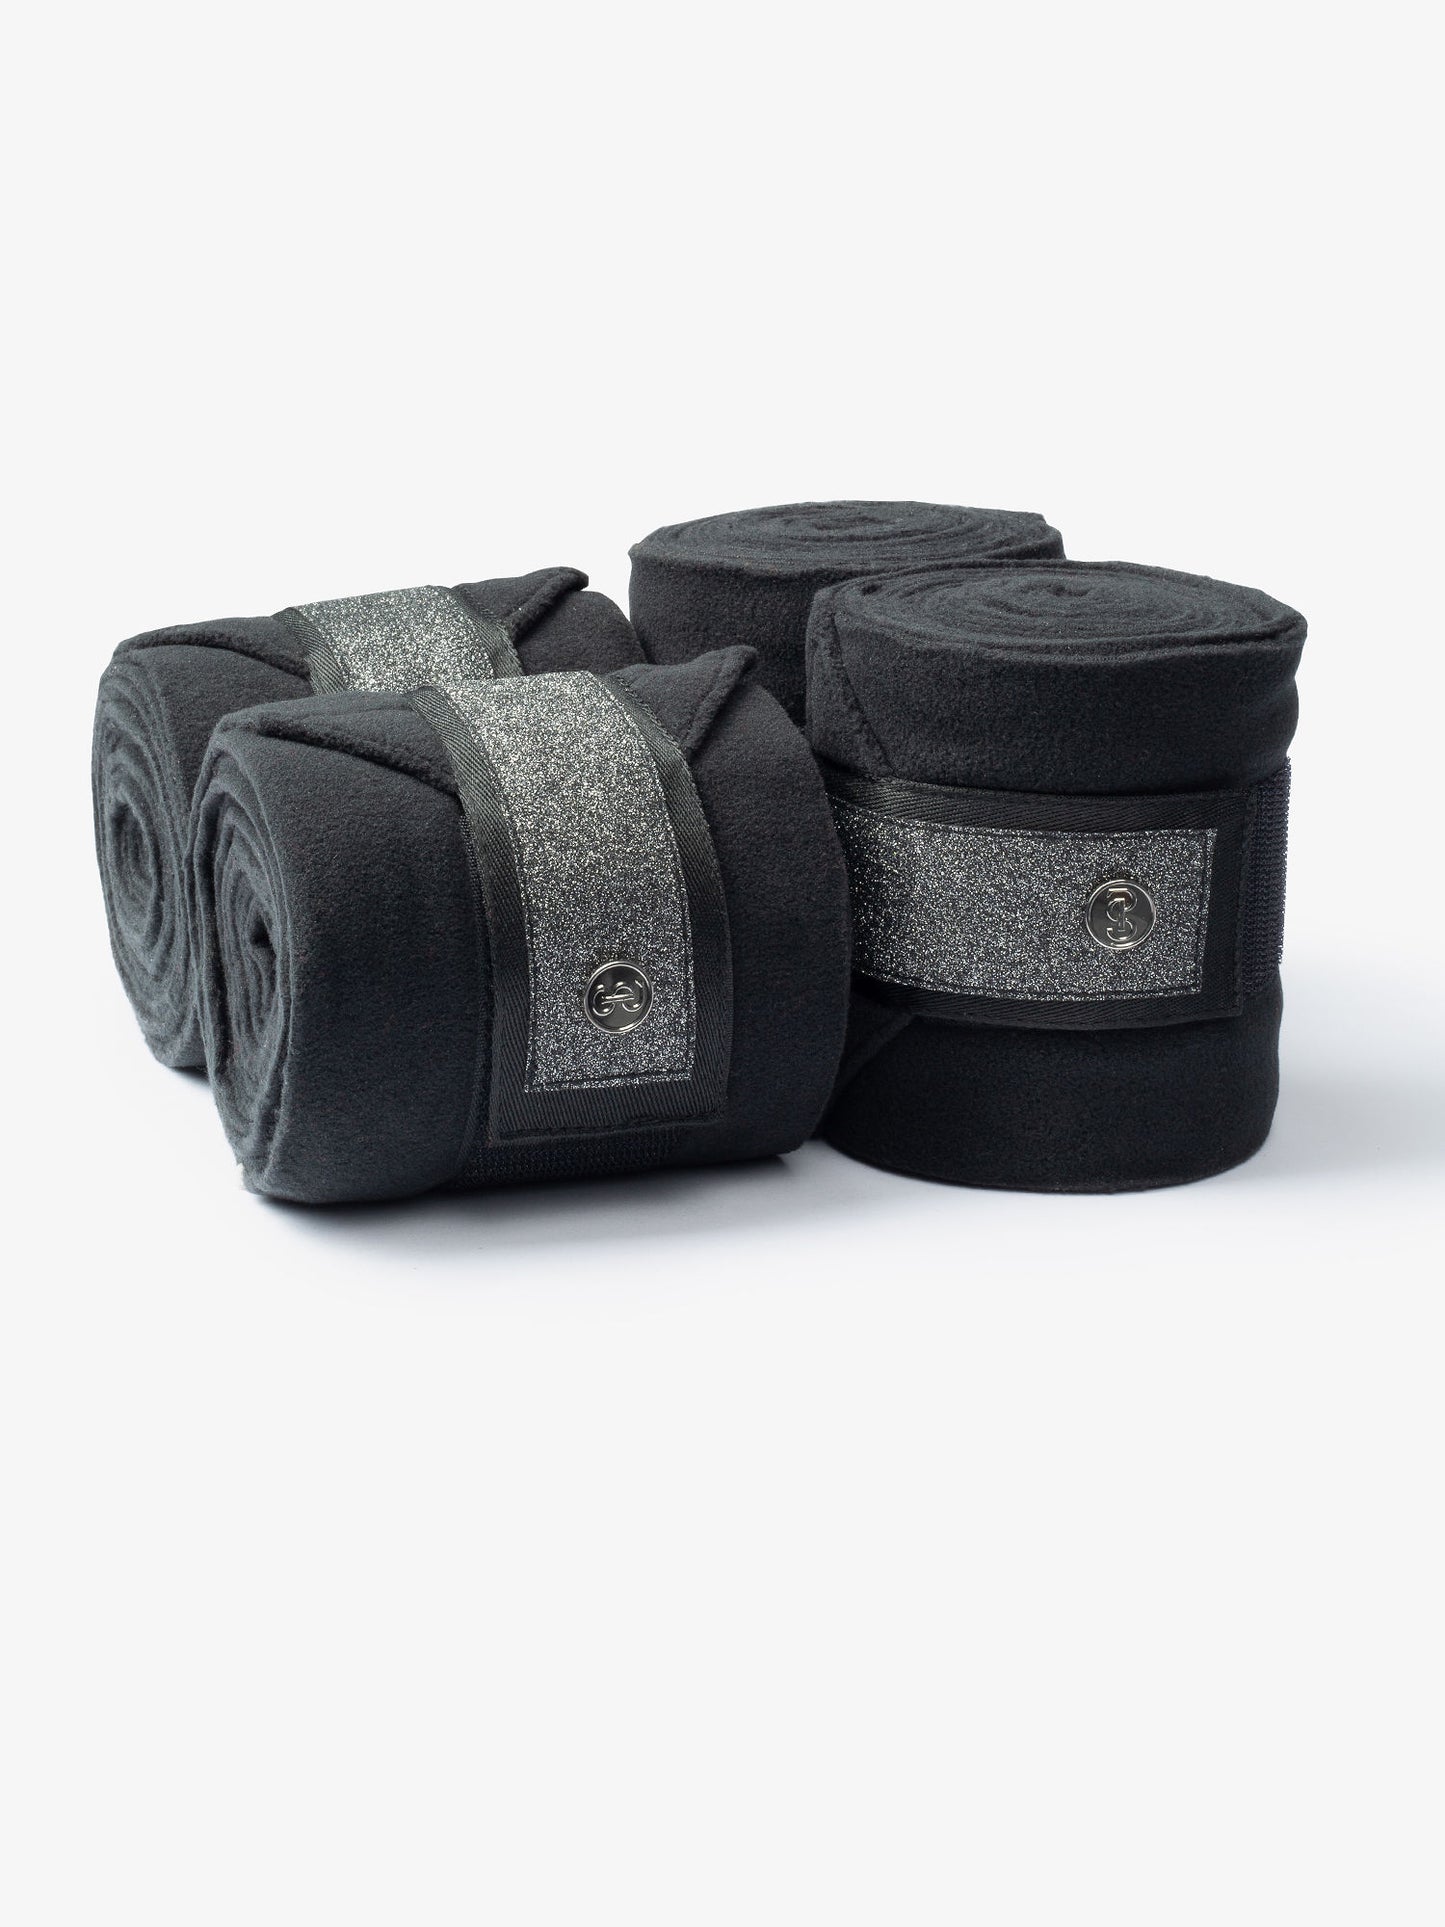 Ps of Sweden - Stardust Christmas Collection - Bandages - Black